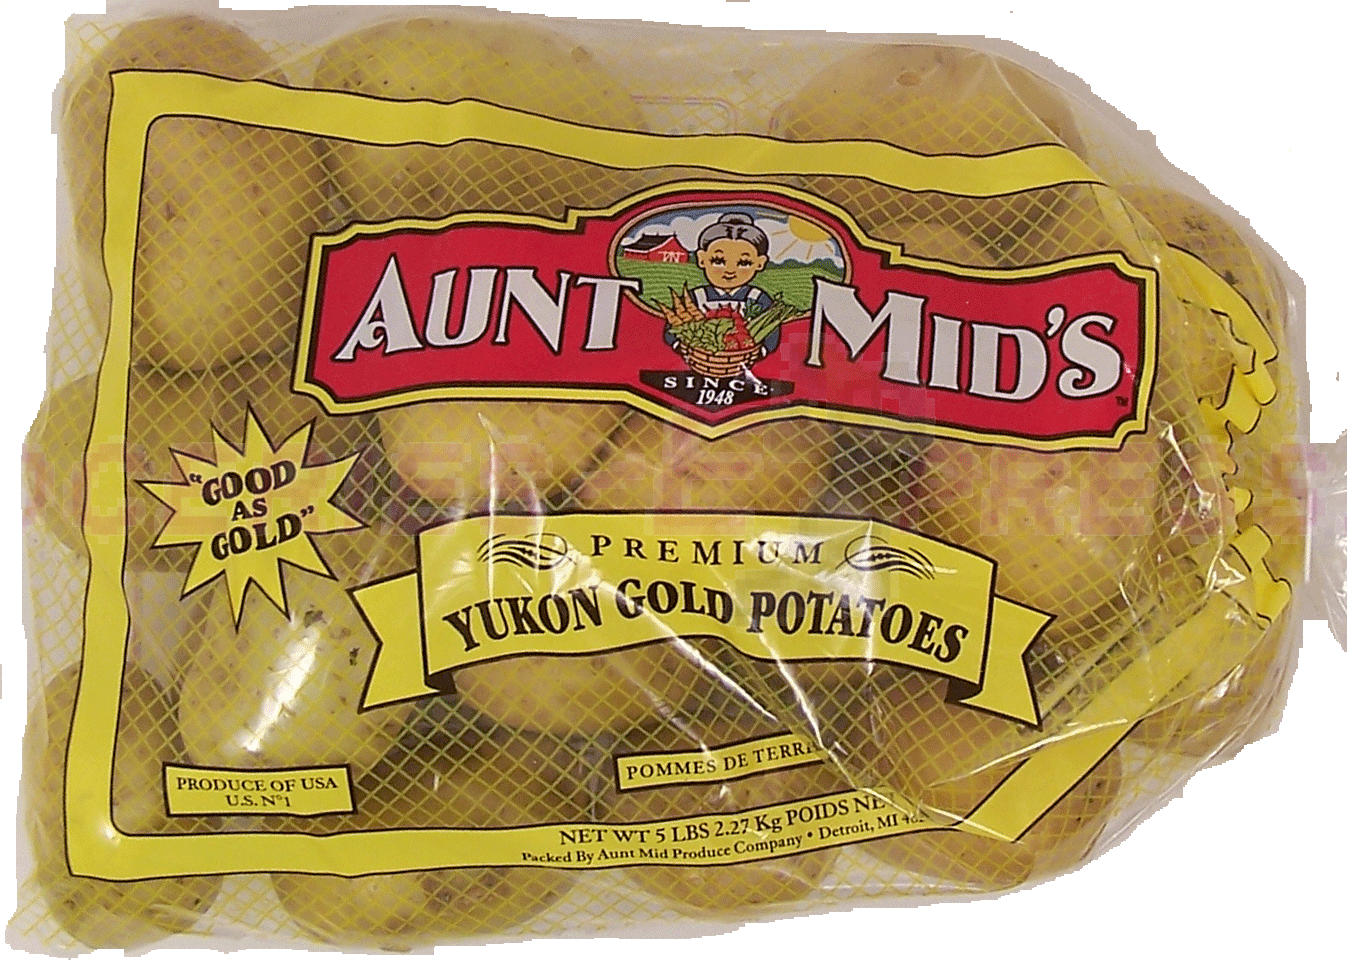 Aunt Mid's  yukon gold potatoes Full-Size Picture